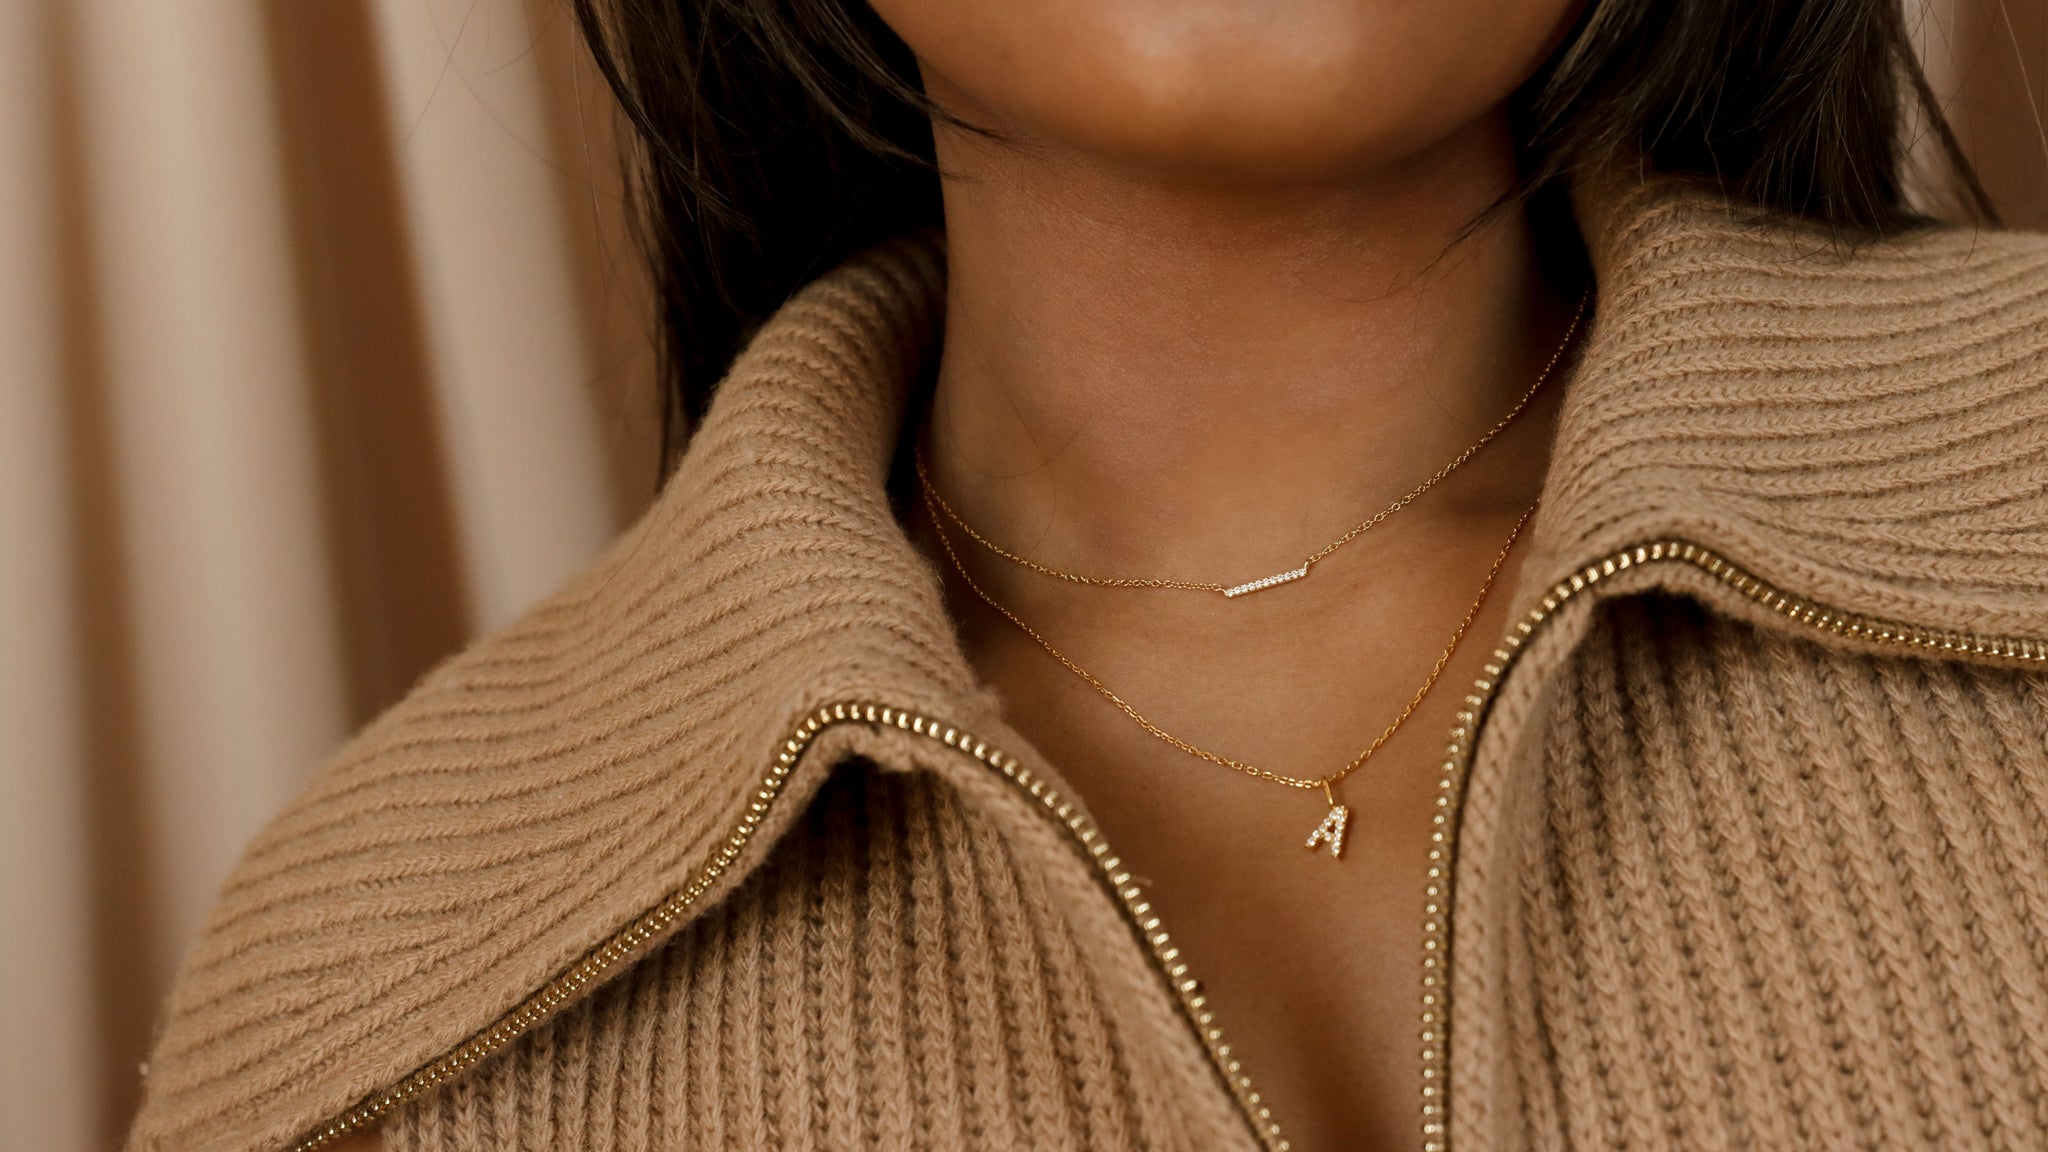 pave necklace, pave jewelry, pendant necklace, personalized jewelry, personalized necklace, initial jewelry, initial necklace, bar necklace, delicate jewelry, delicate necklace stack, dainty jewelry, minimalist necklaces, jewelry trends 2021